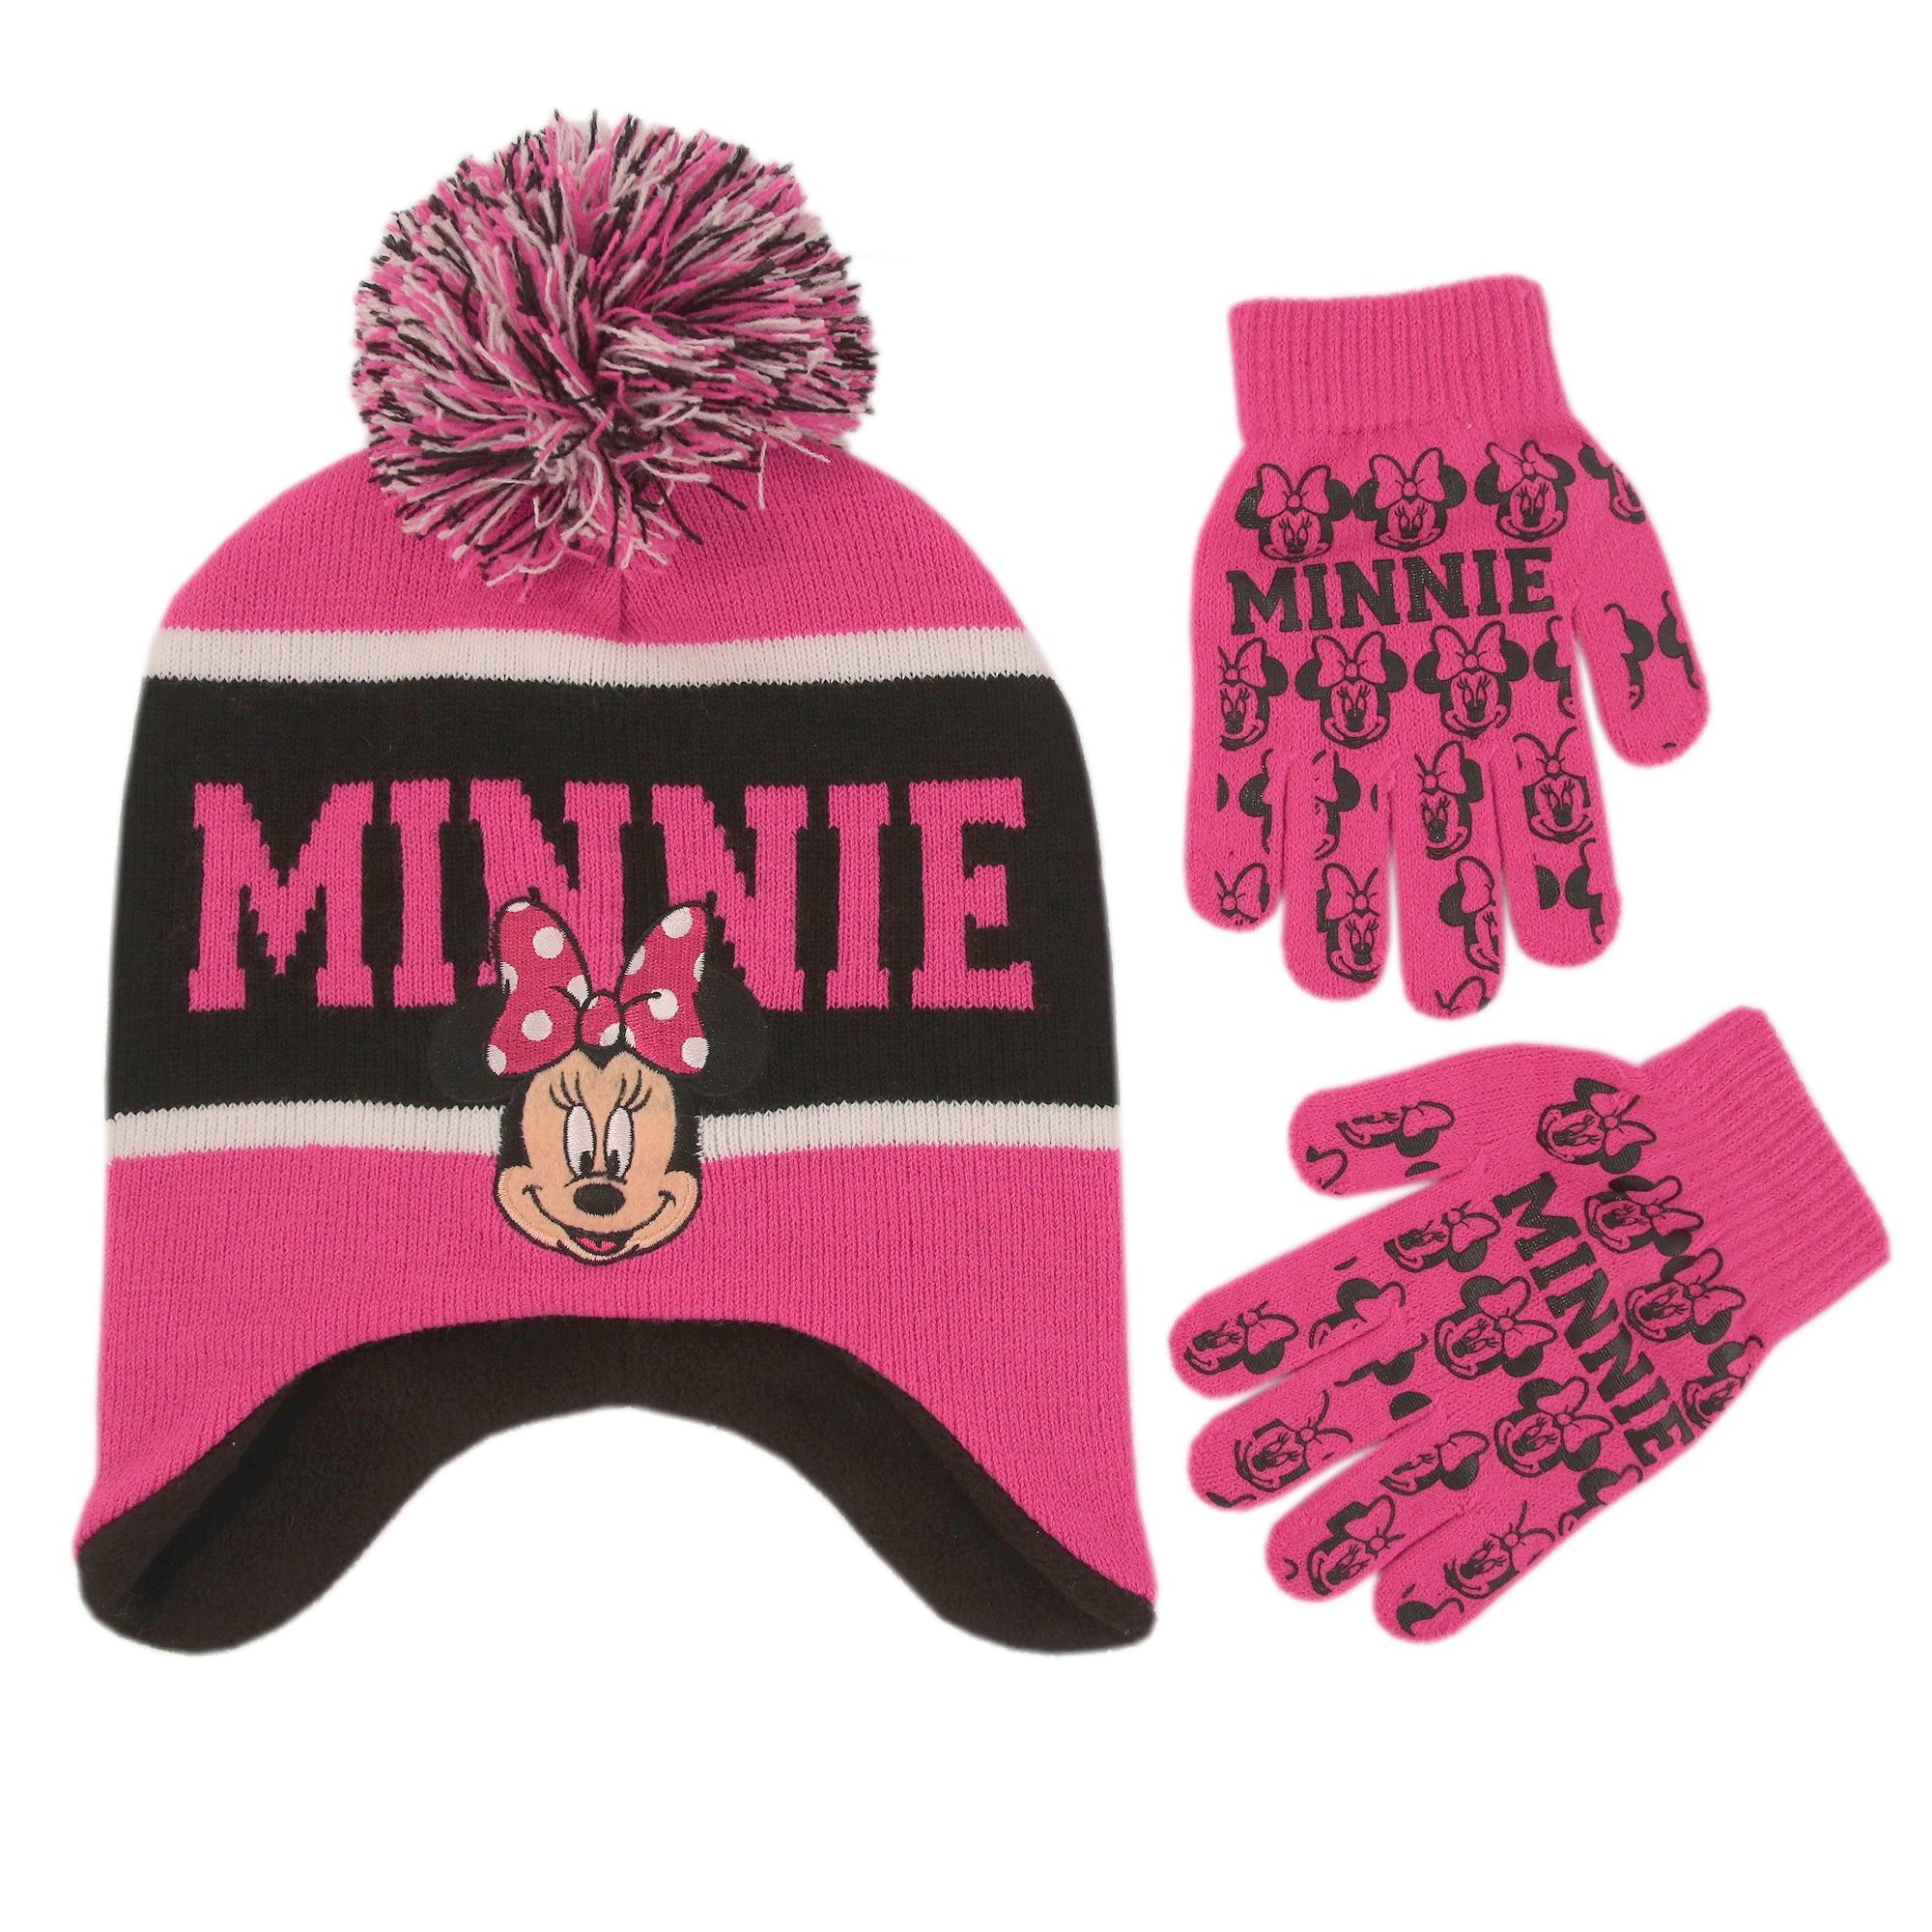 Details about   Disney Girls Minnie Mouse Hat and Mittens Size Toddler NWT 